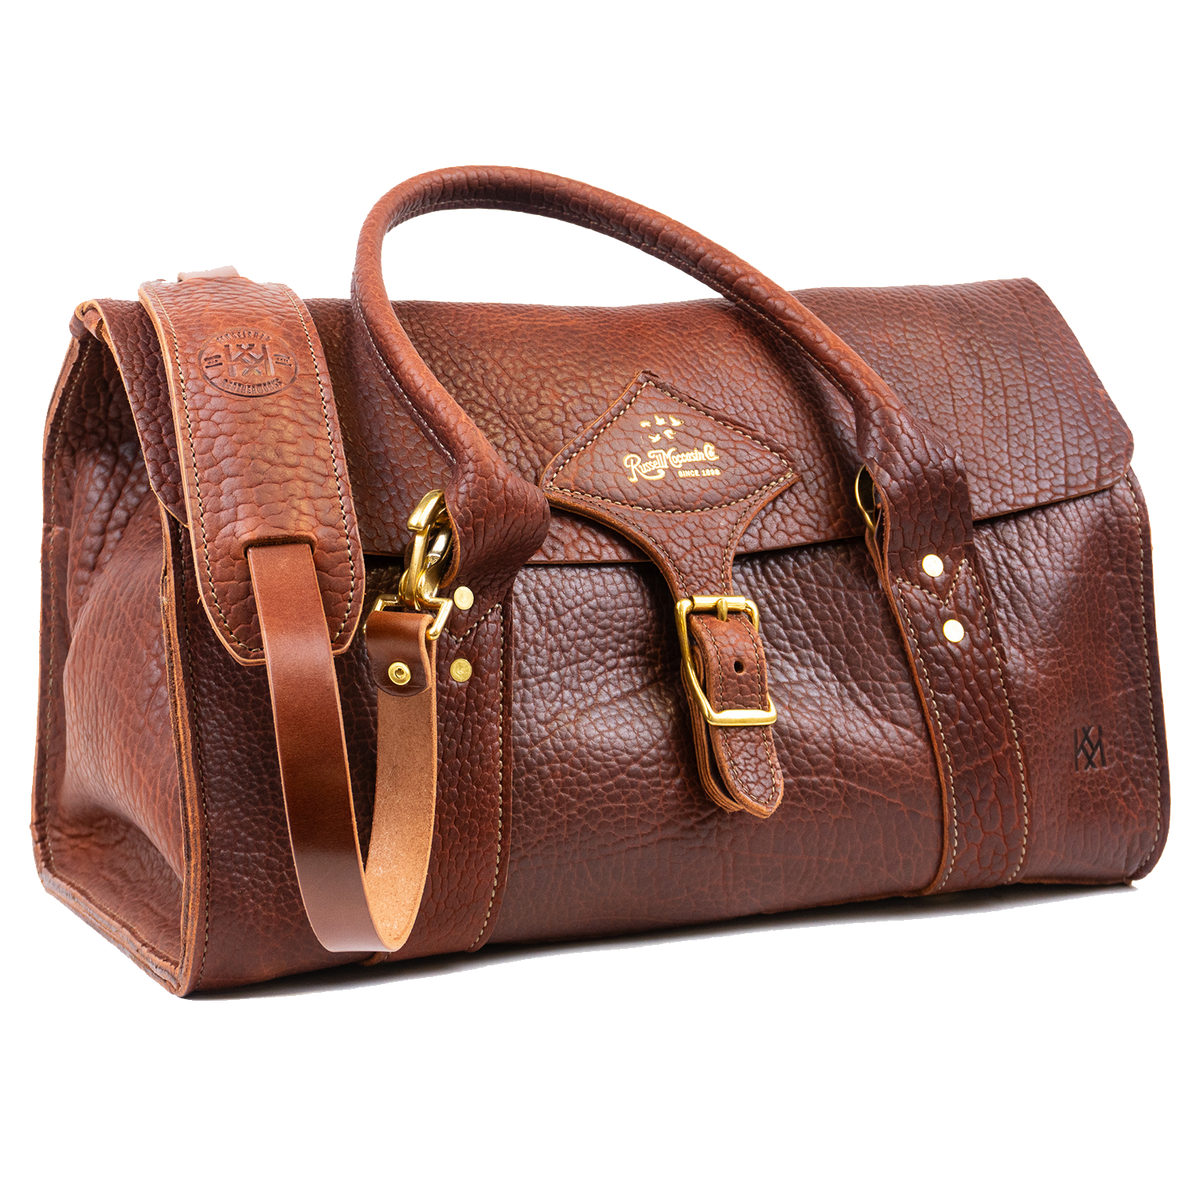 Russell X Kingfisher Weekend Bag